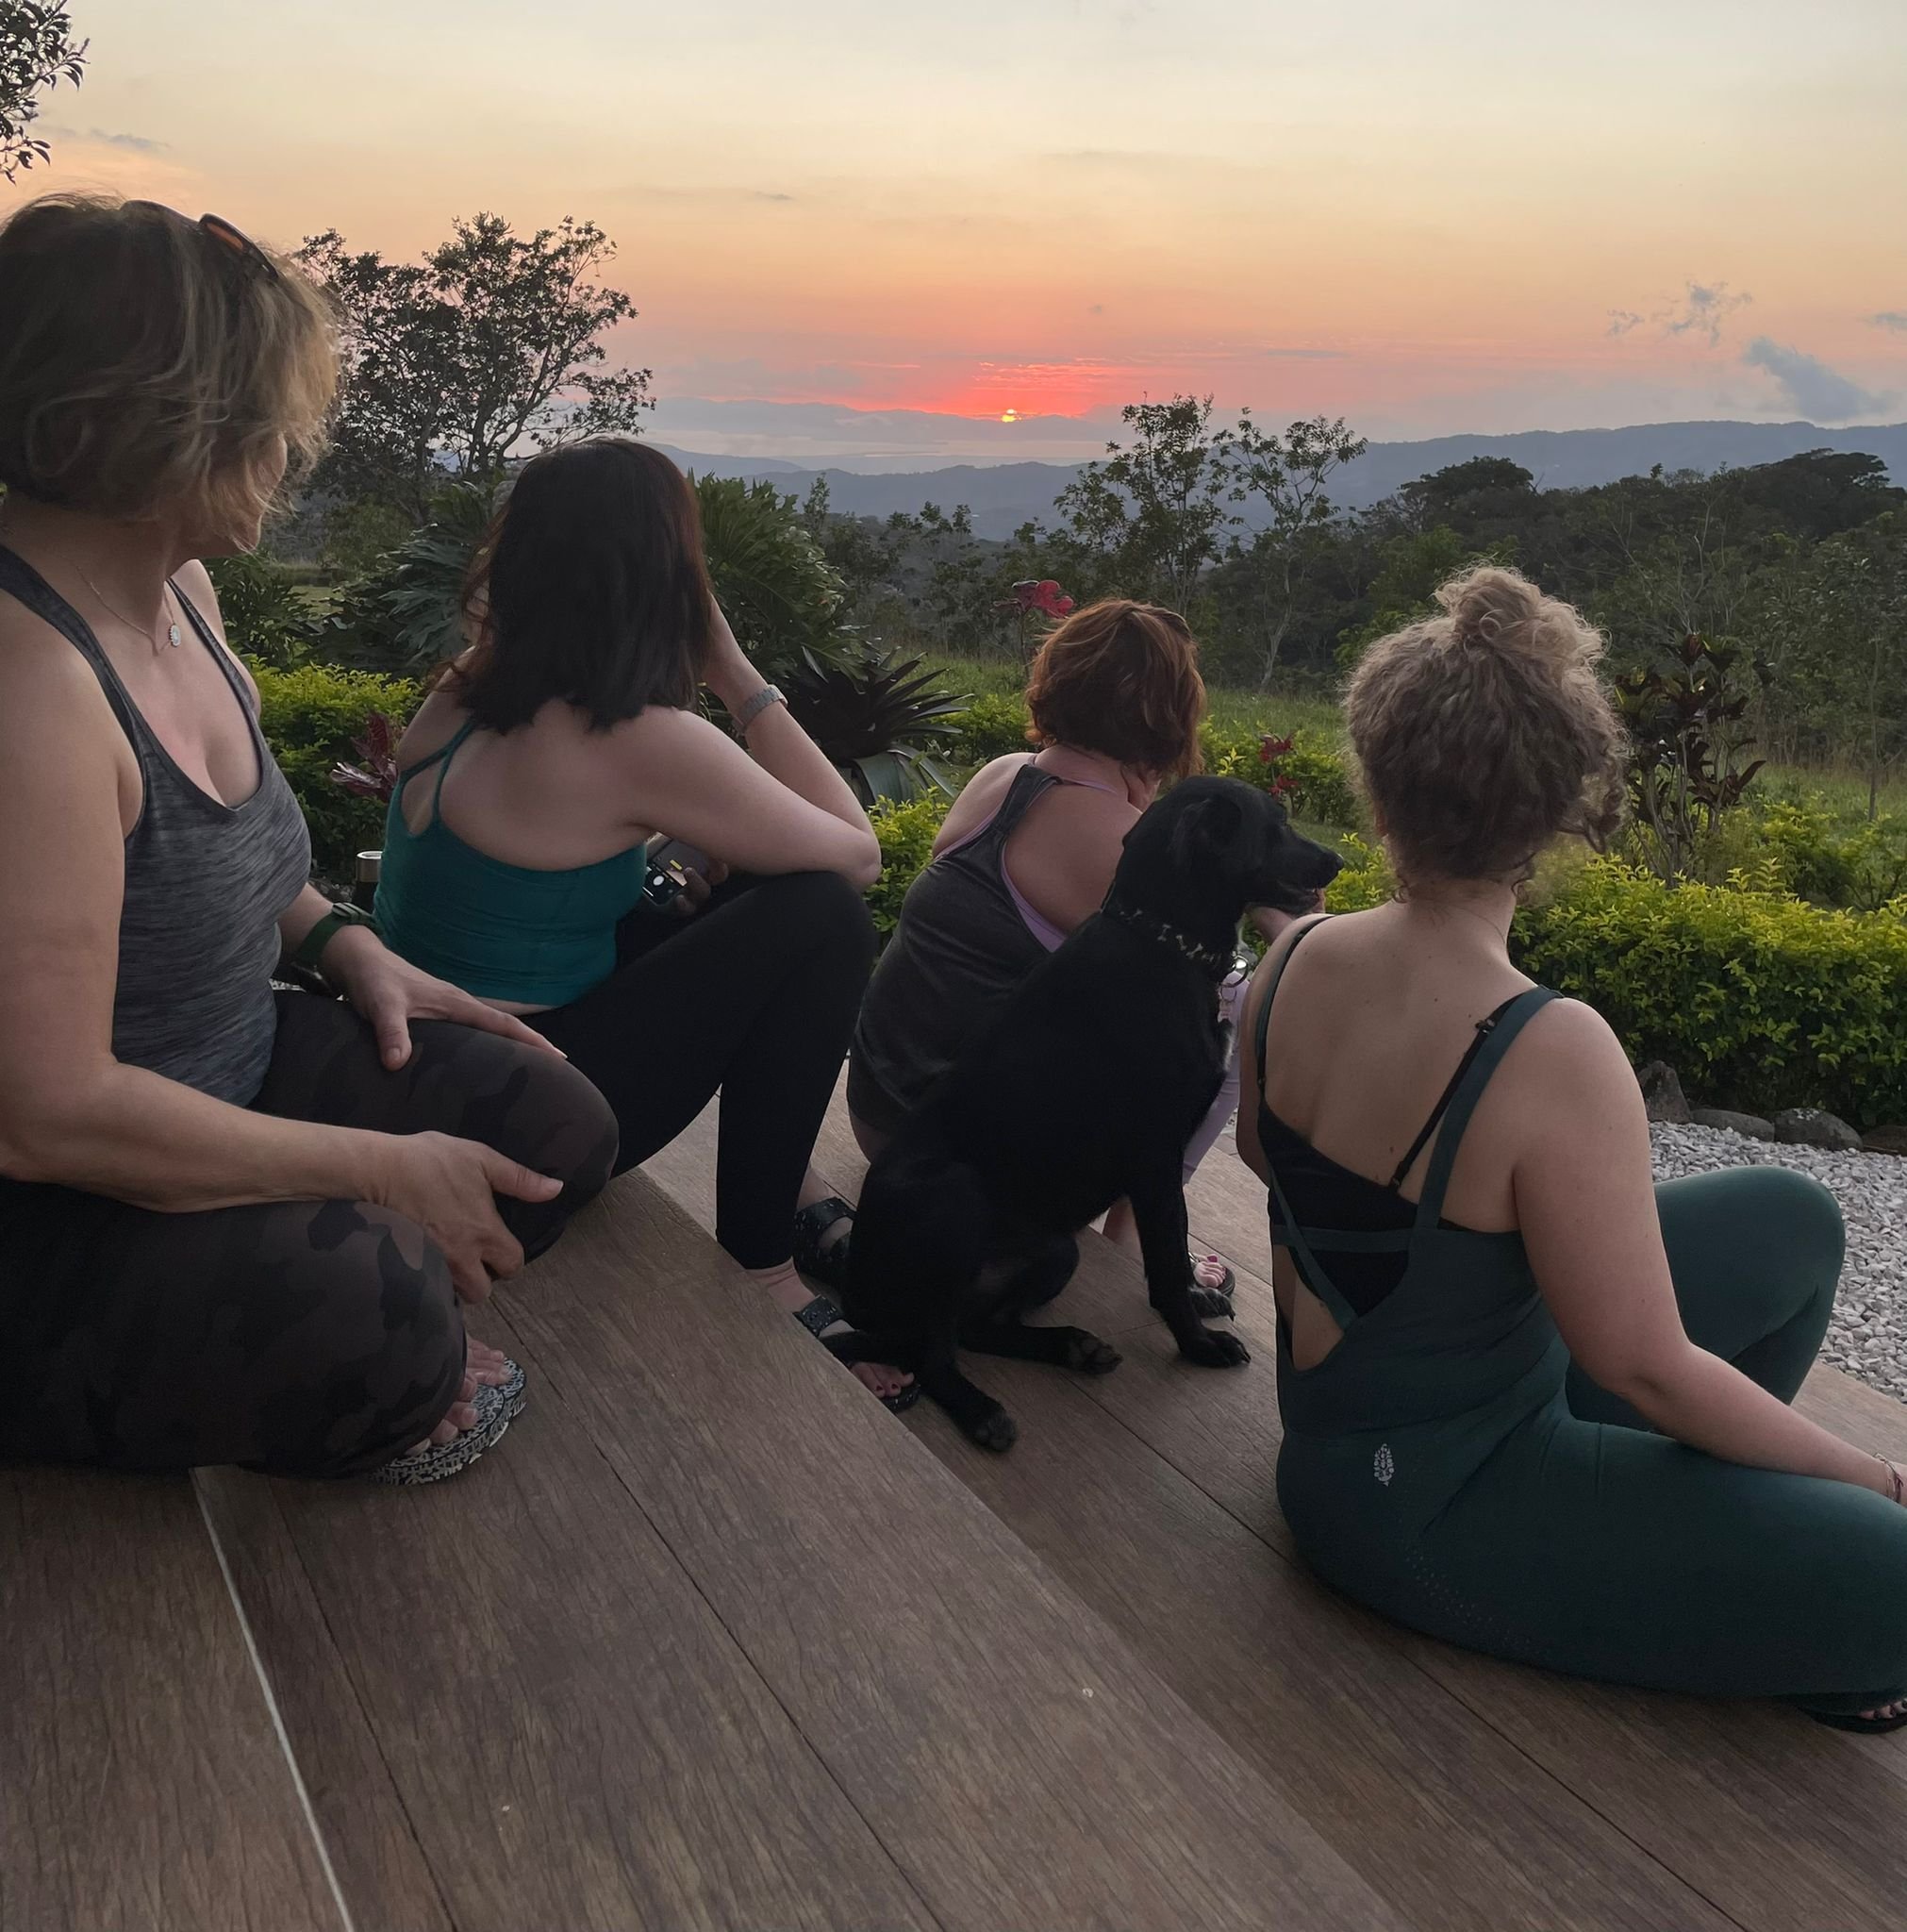 Guests taking in the sunset after yoga in Costa Rica